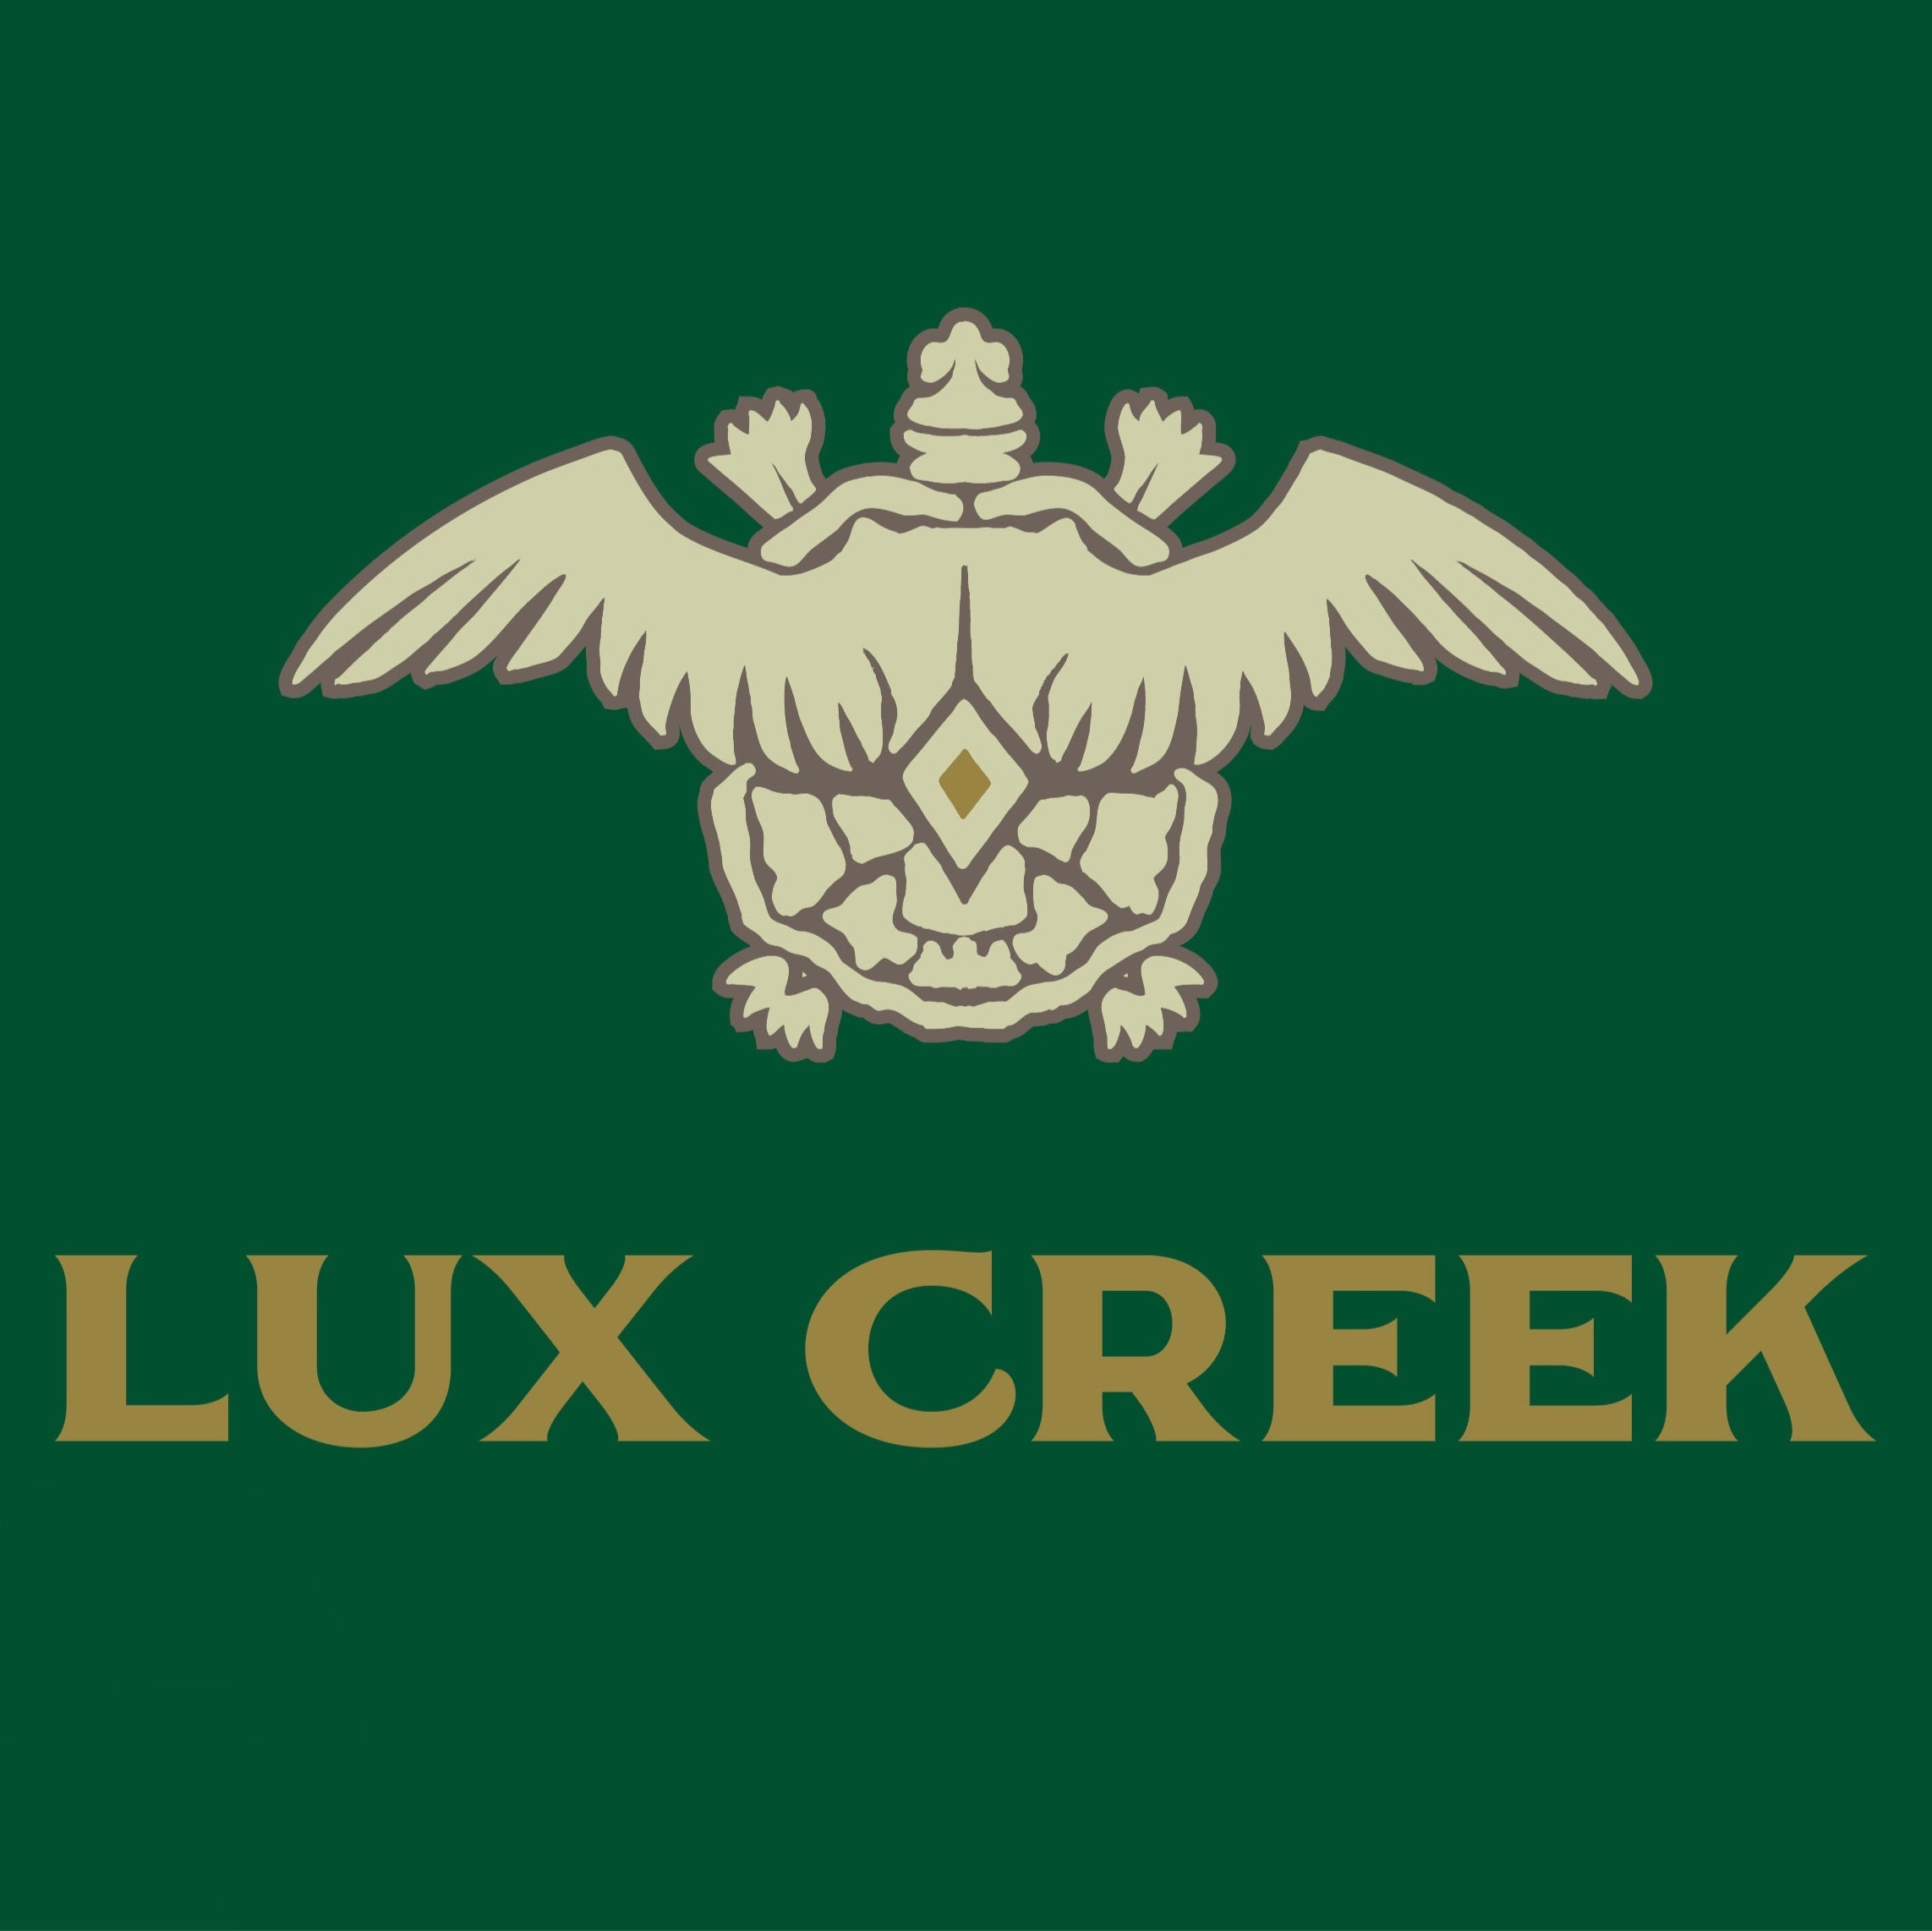 #produc#t_name# - Lux Creek